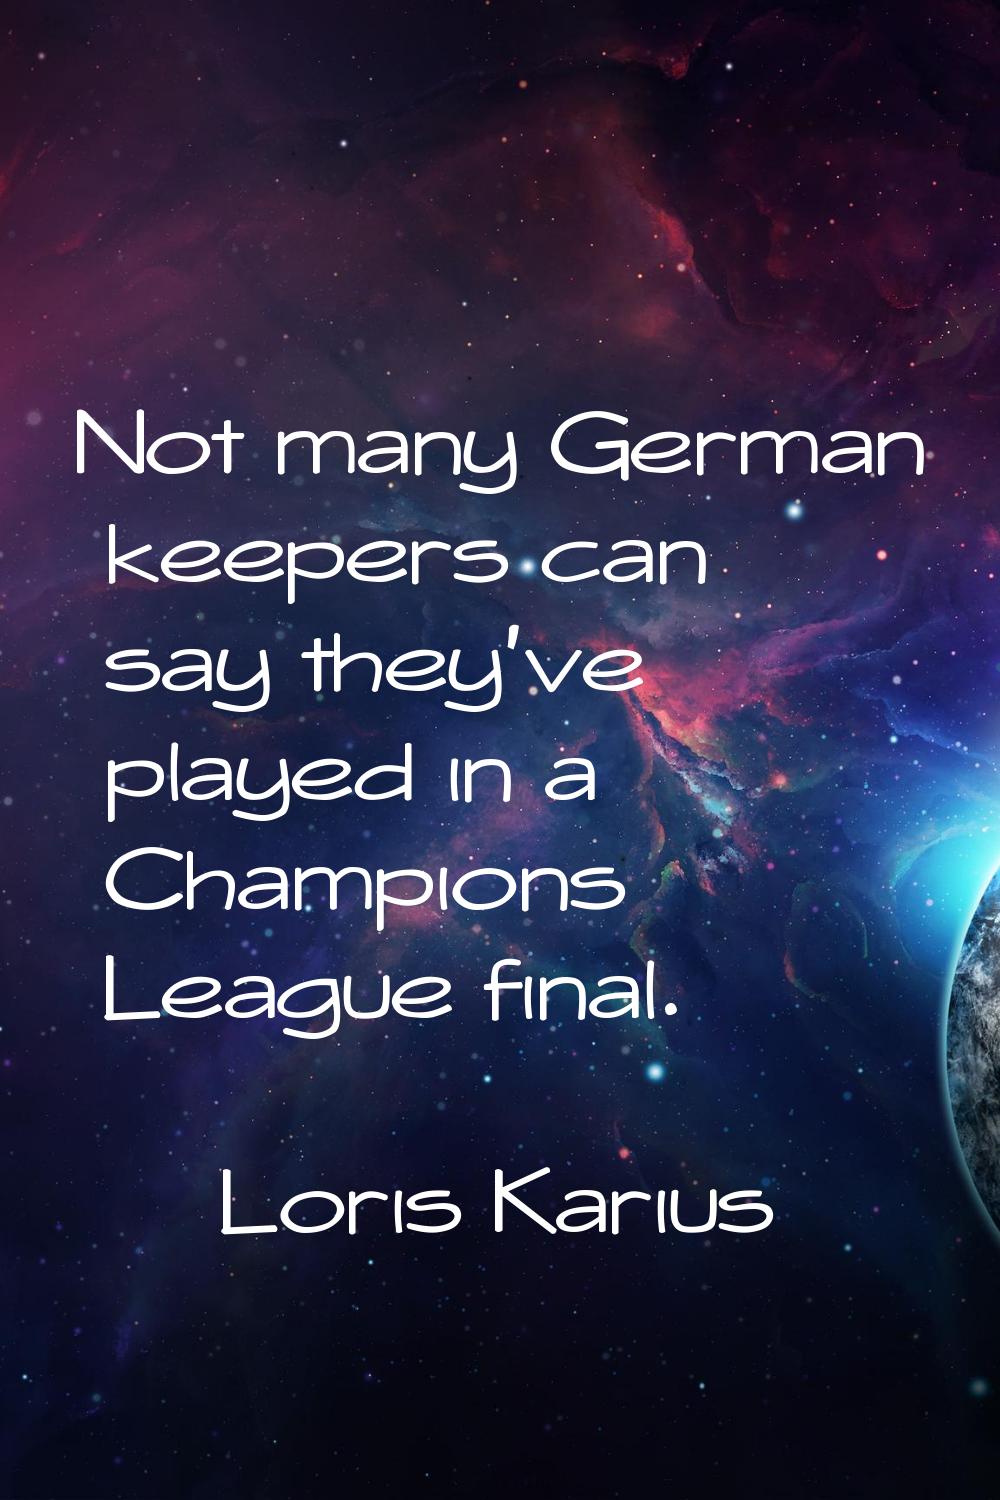 Not many German keepers can say they've played in a Champions League final.